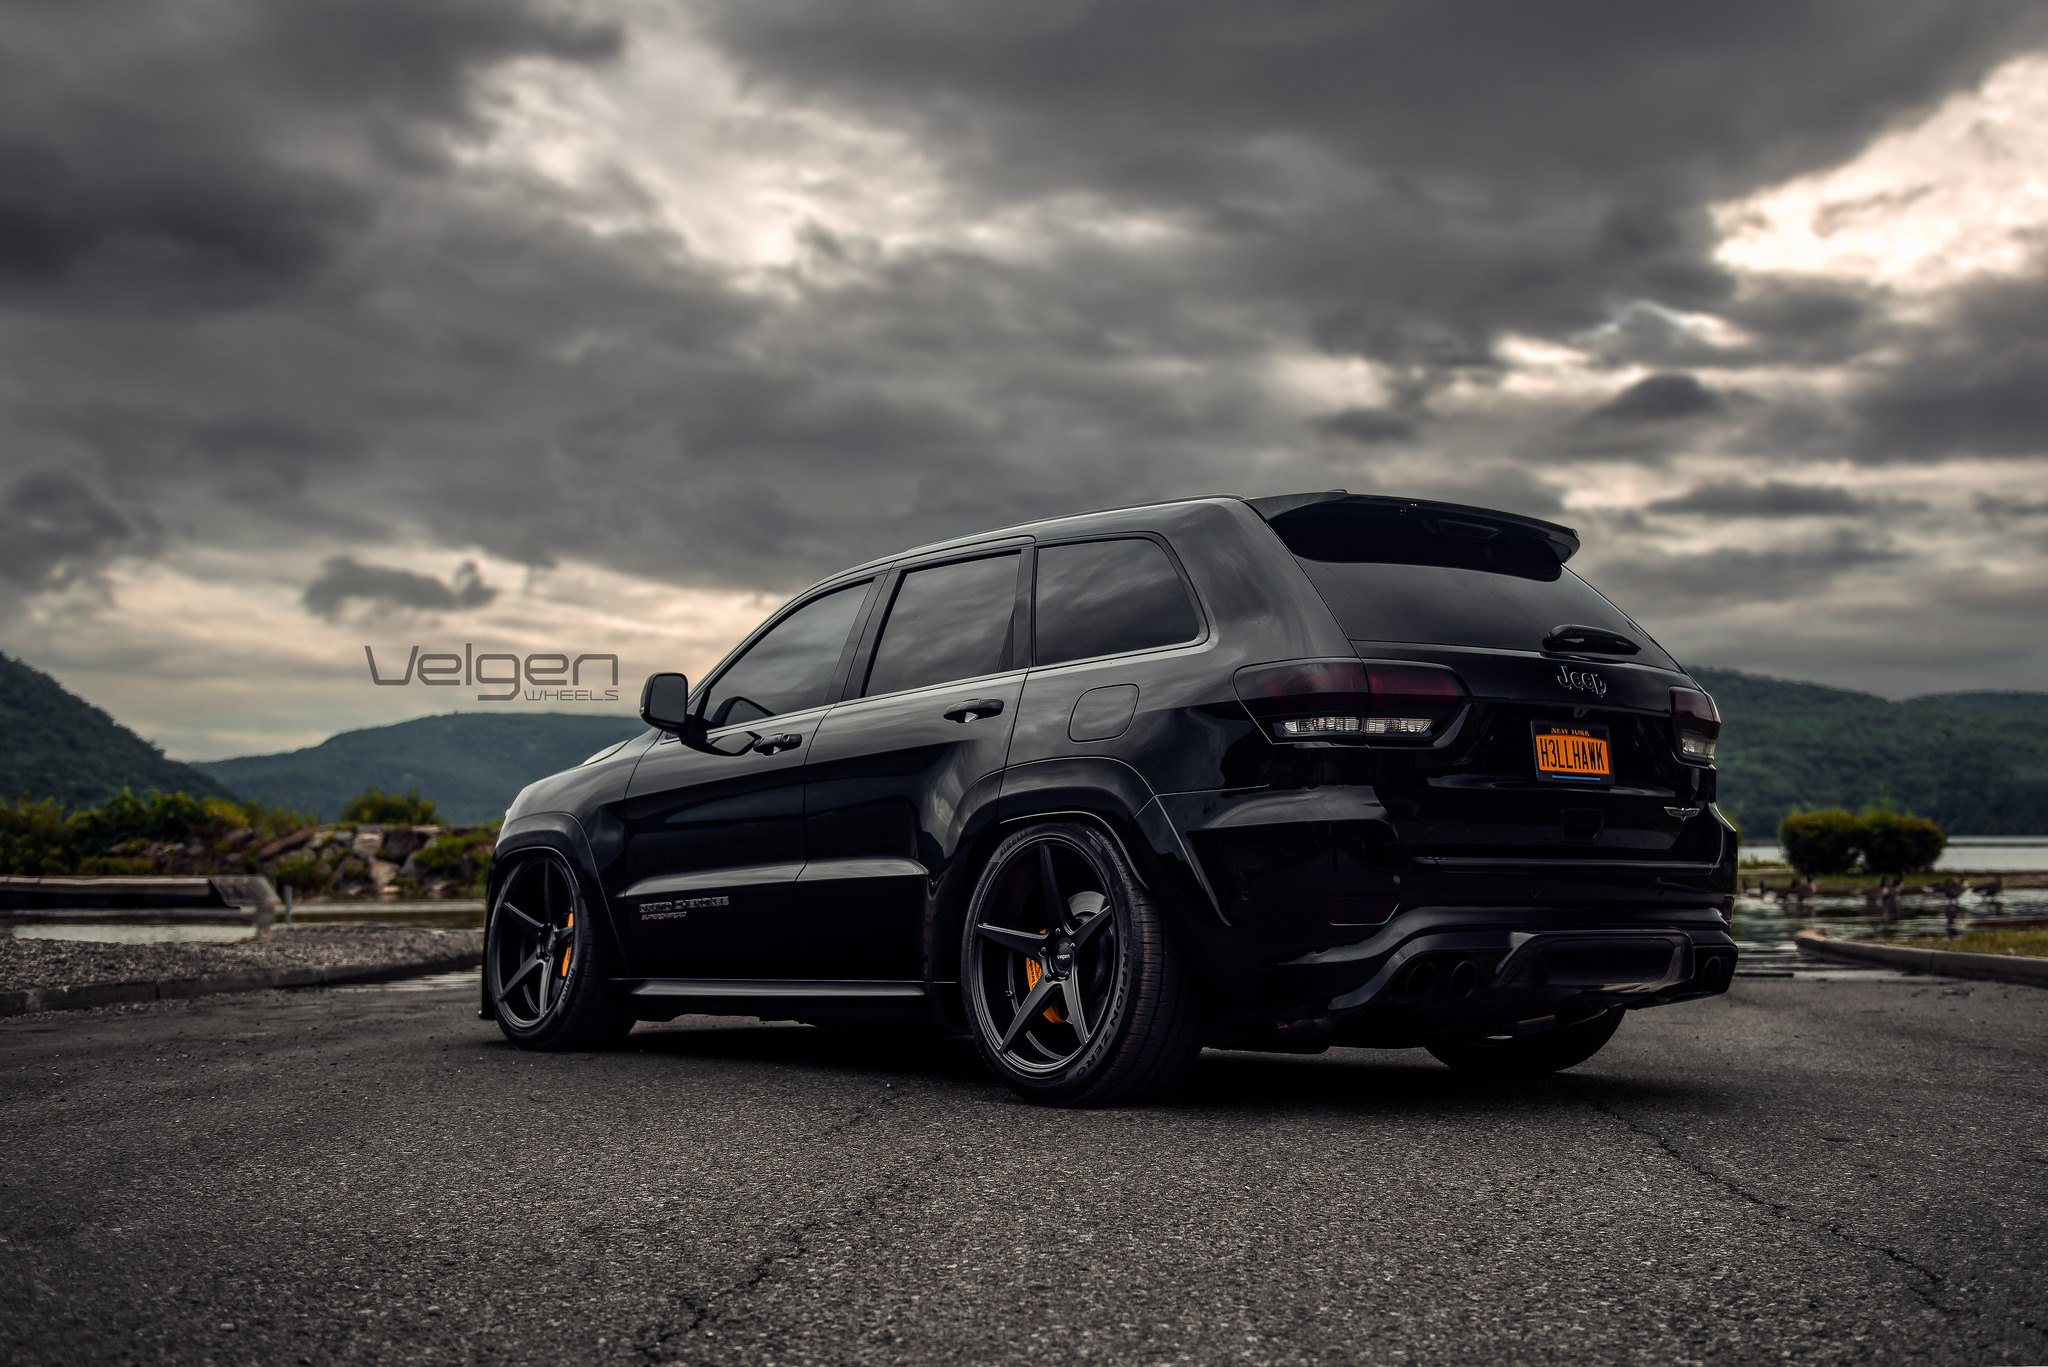 Blacked Out Jeep Grand Cherokee Gets Sharp Look With Aftermarket Body Kit — CARiD.com Gallery